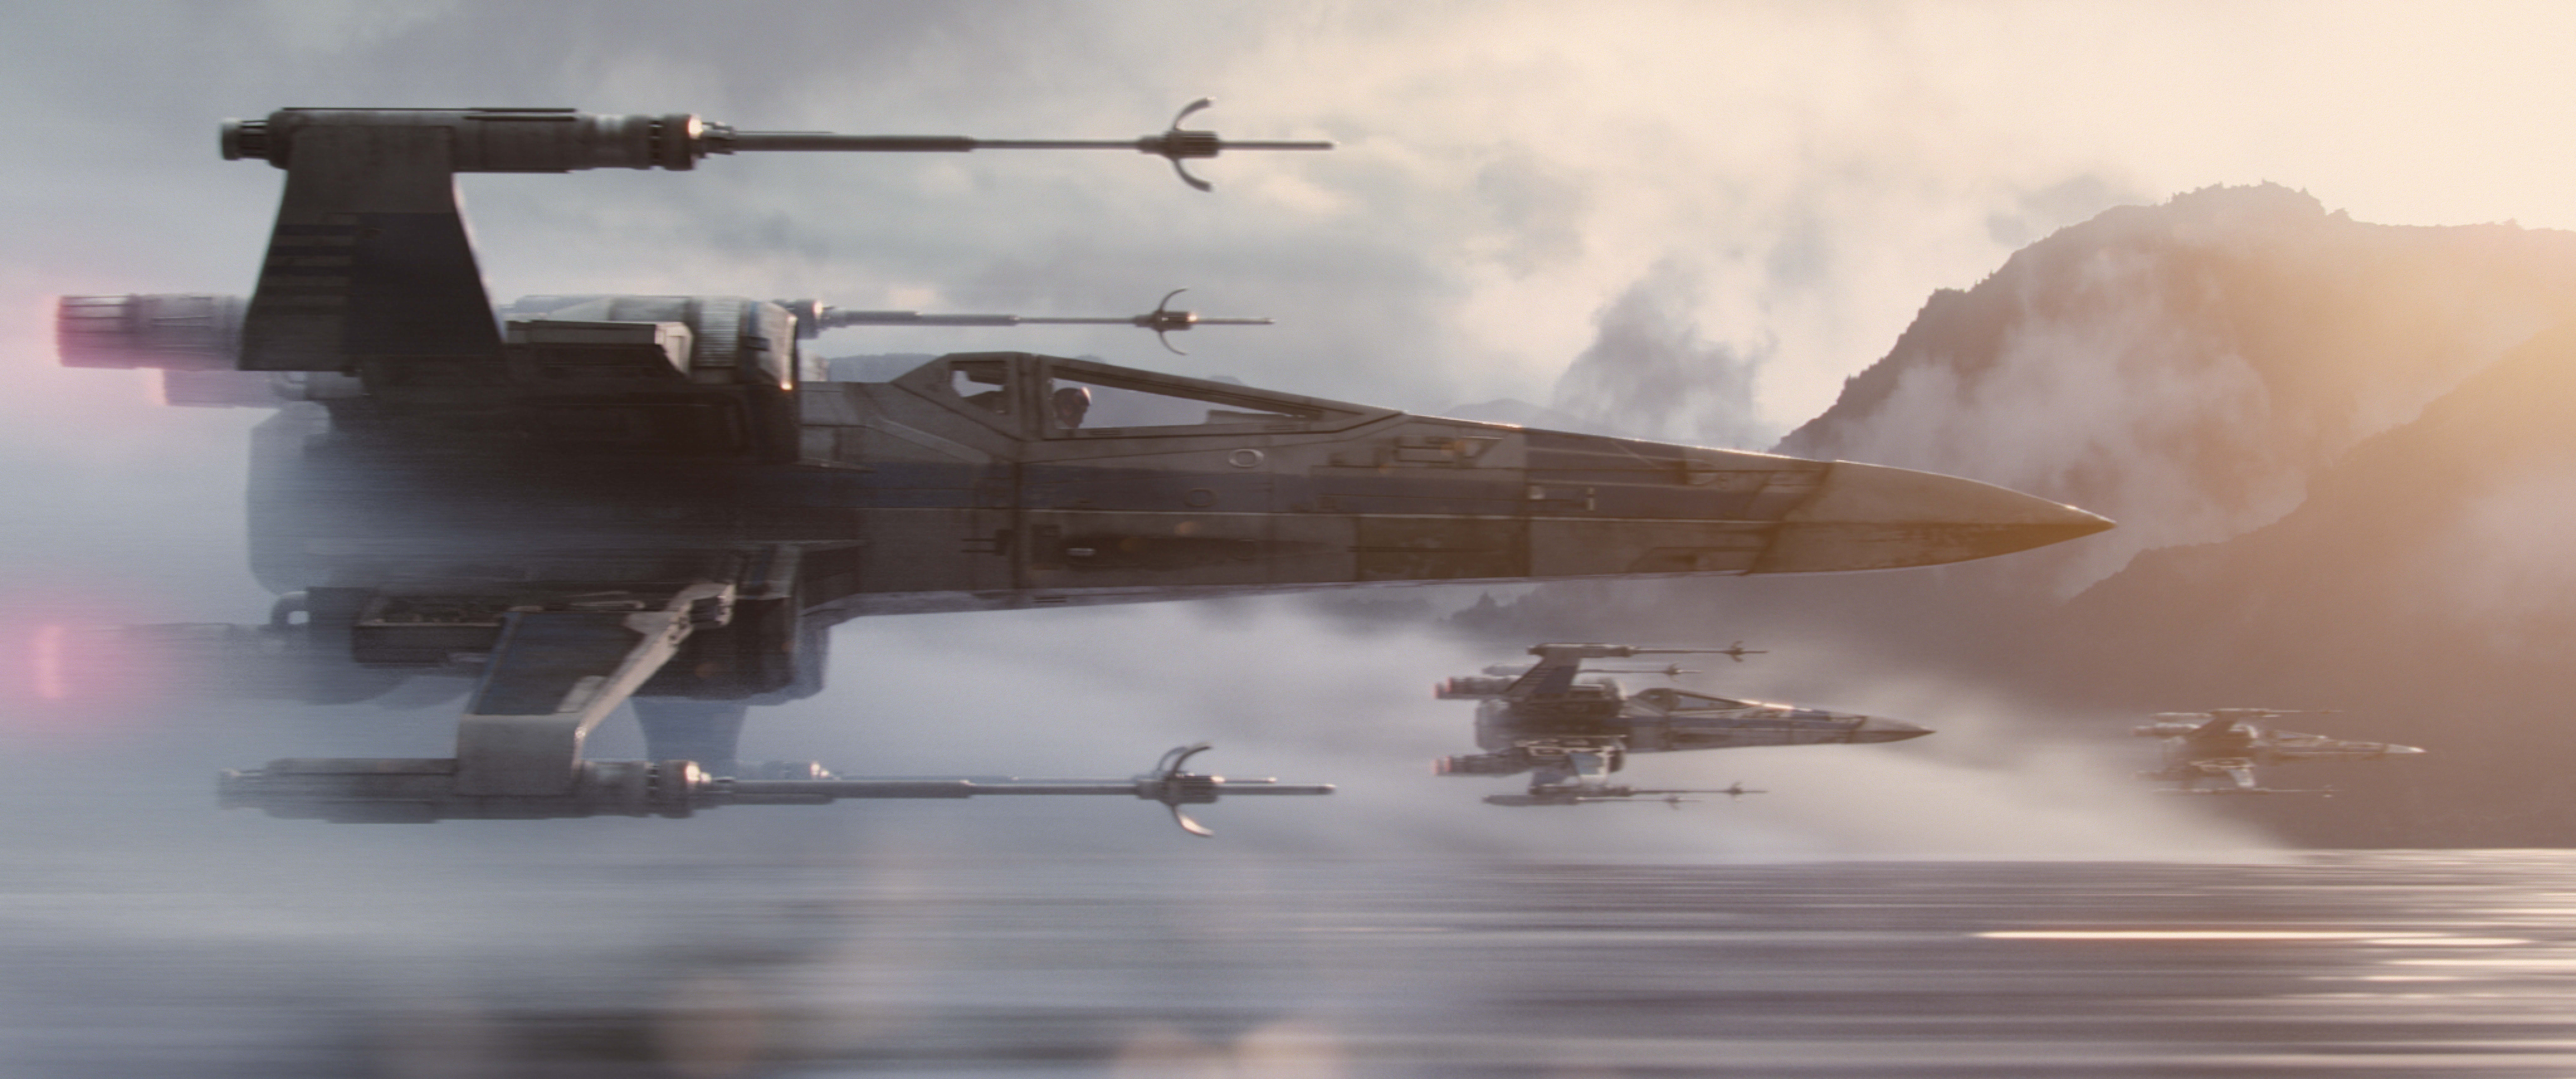 An X-Wing Starfighter from the upcoming film, Star Wars: The Force Awakens.